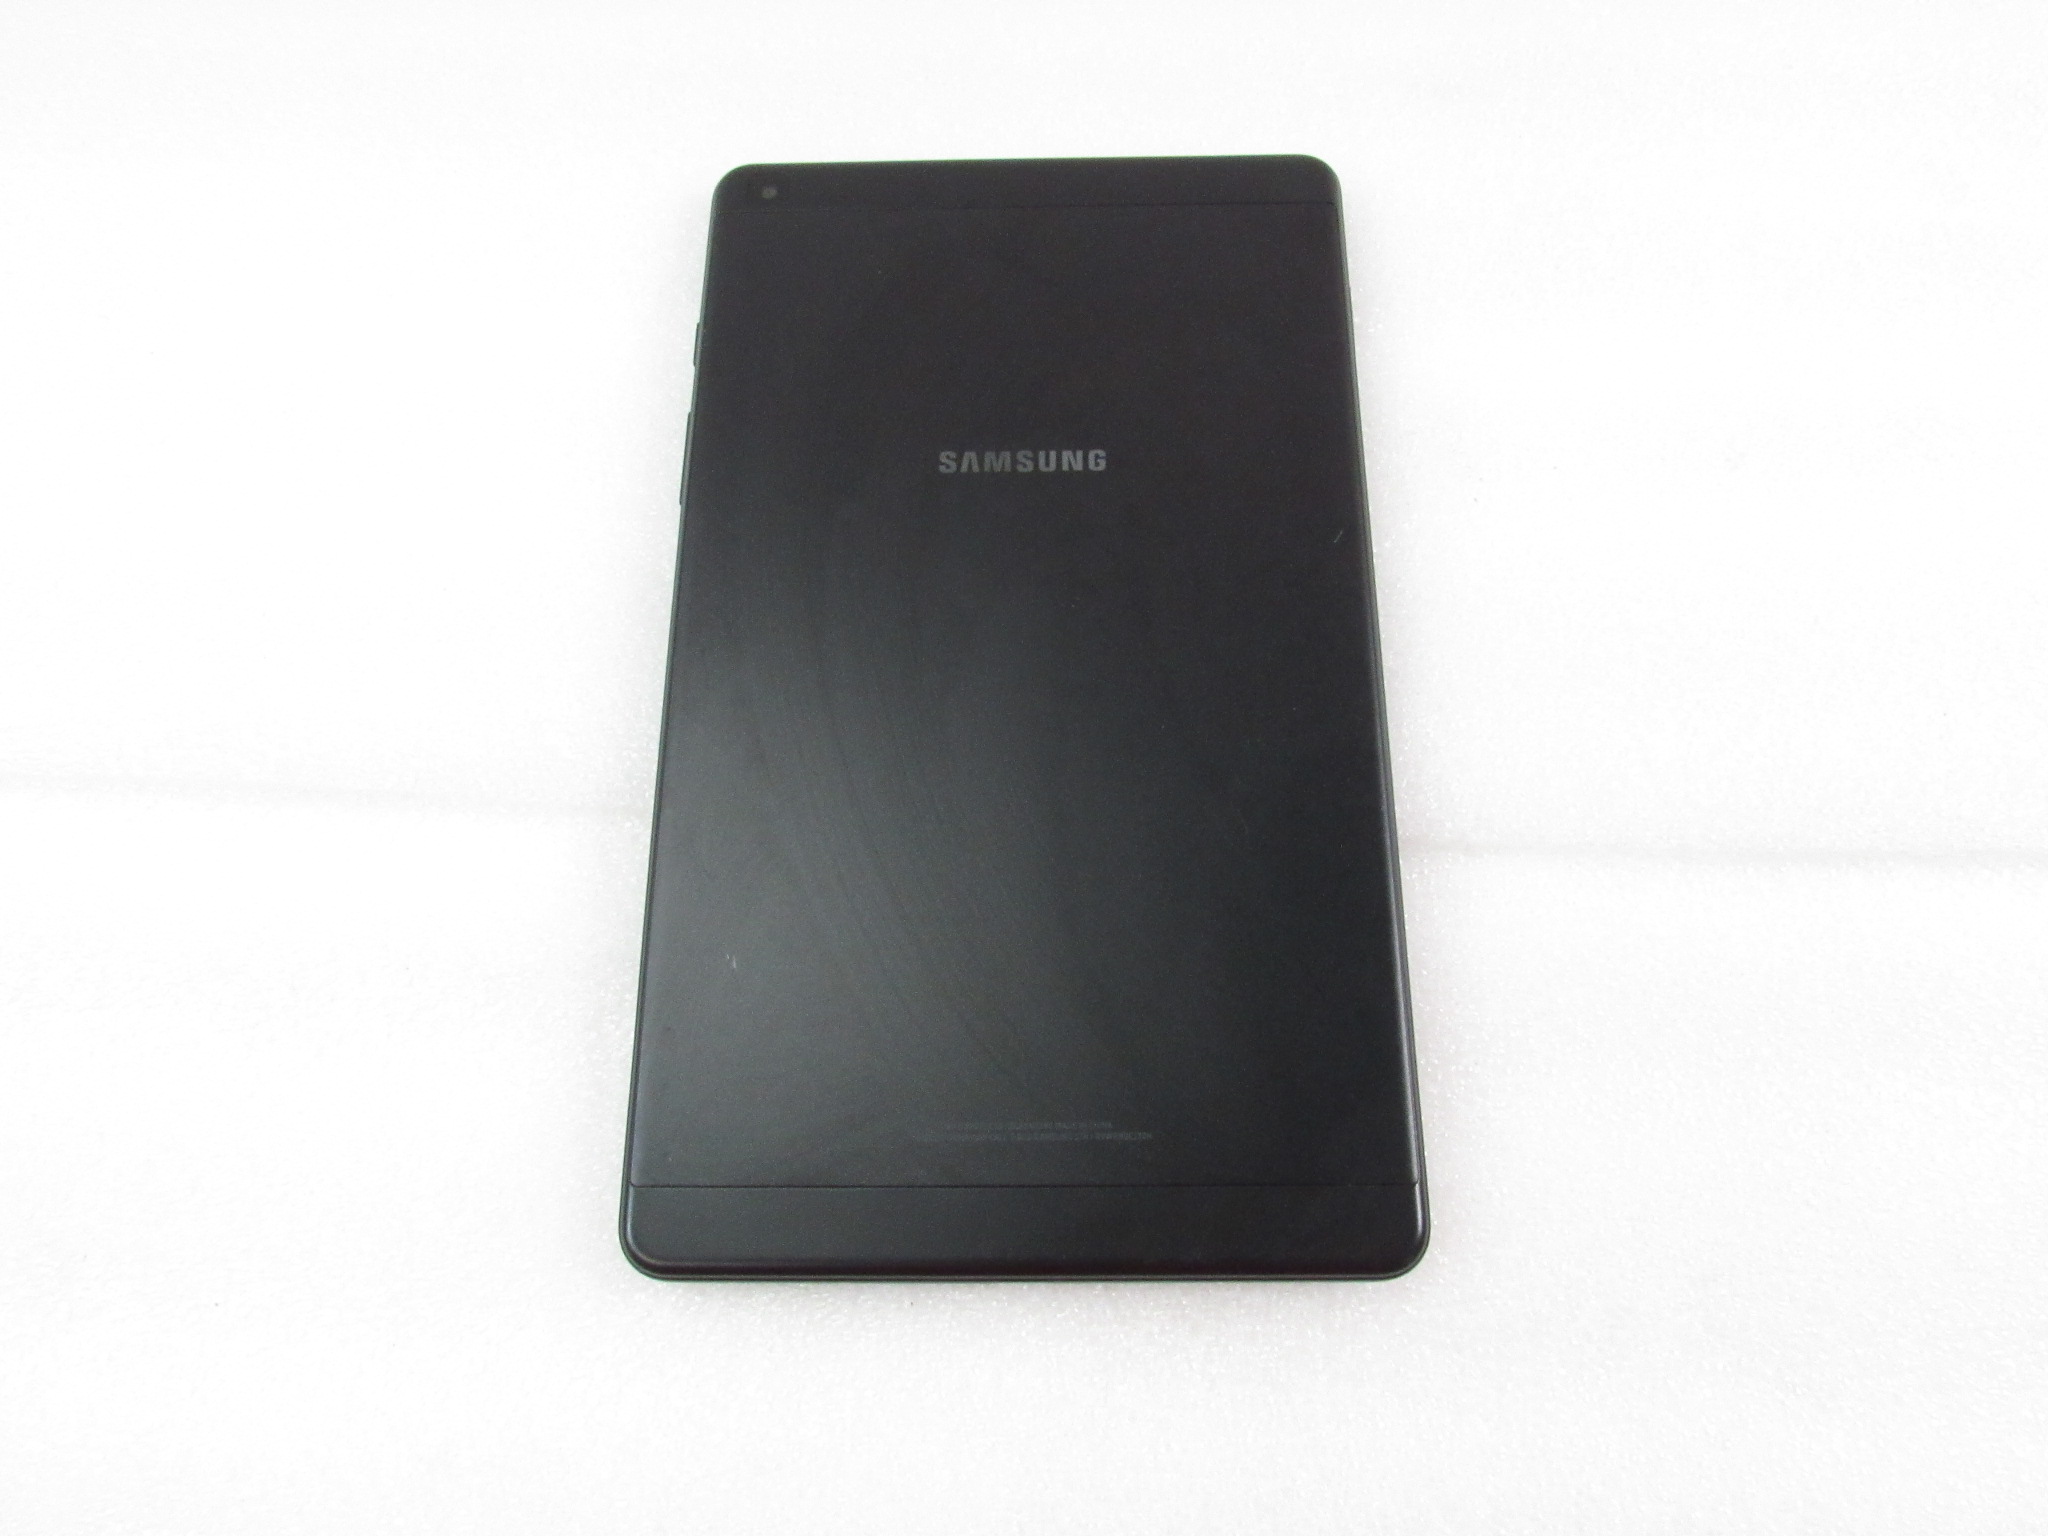 Display lcd by Samsung Galaxy Tab A 8.0 T290 with white touch